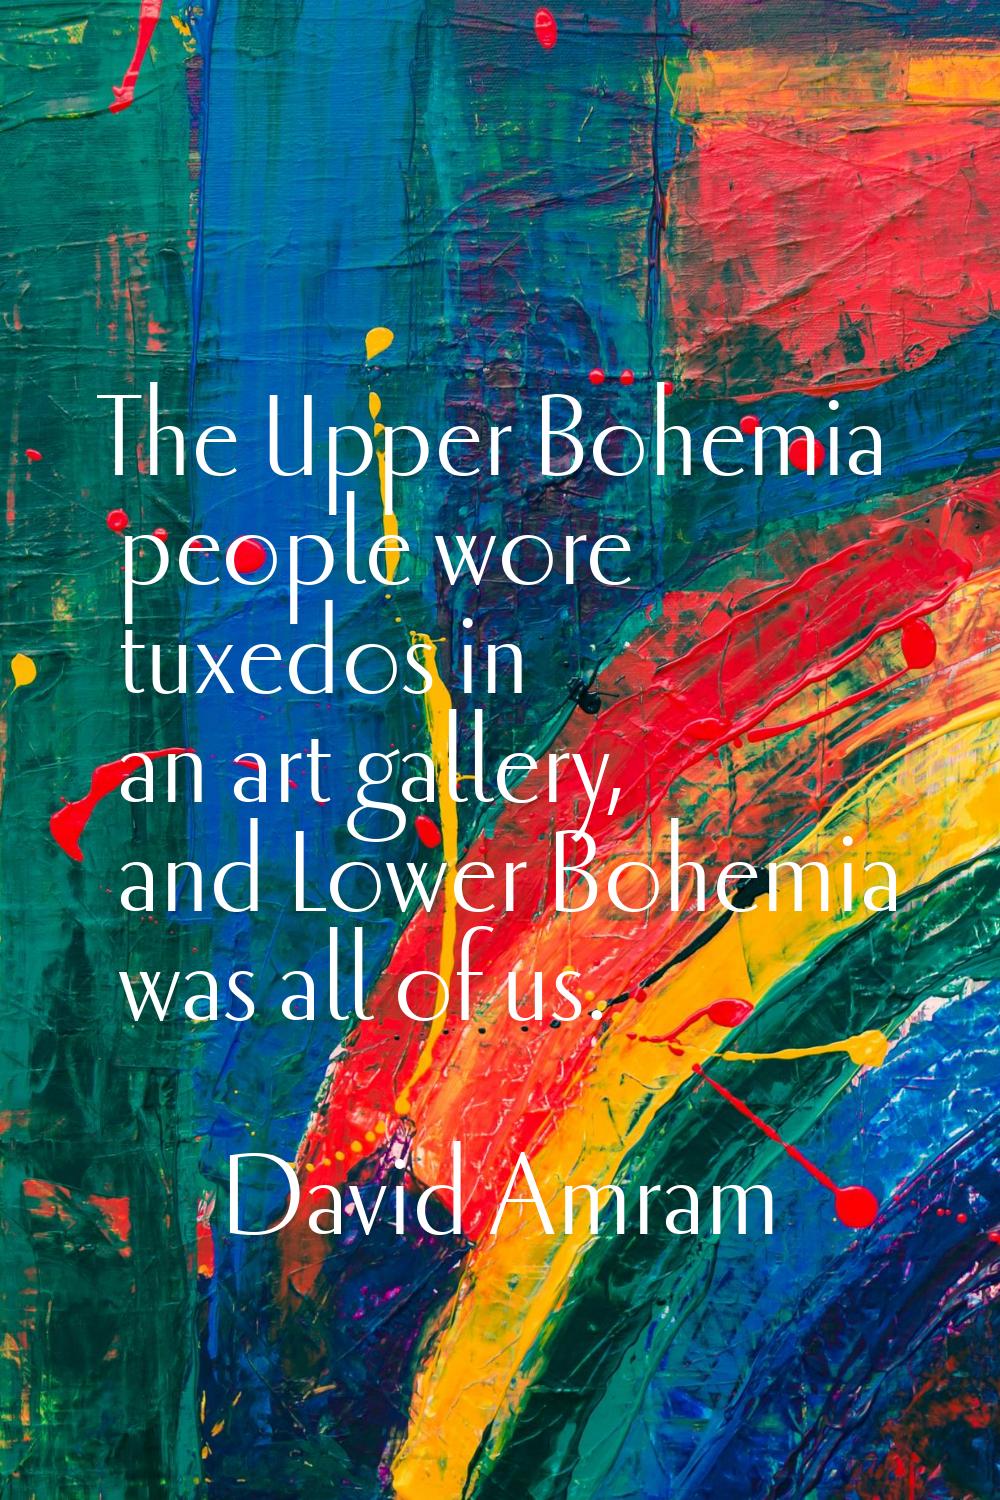 The Upper Bohemia people wore tuxedos in an art gallery, and Lower Bohemia was all of us.